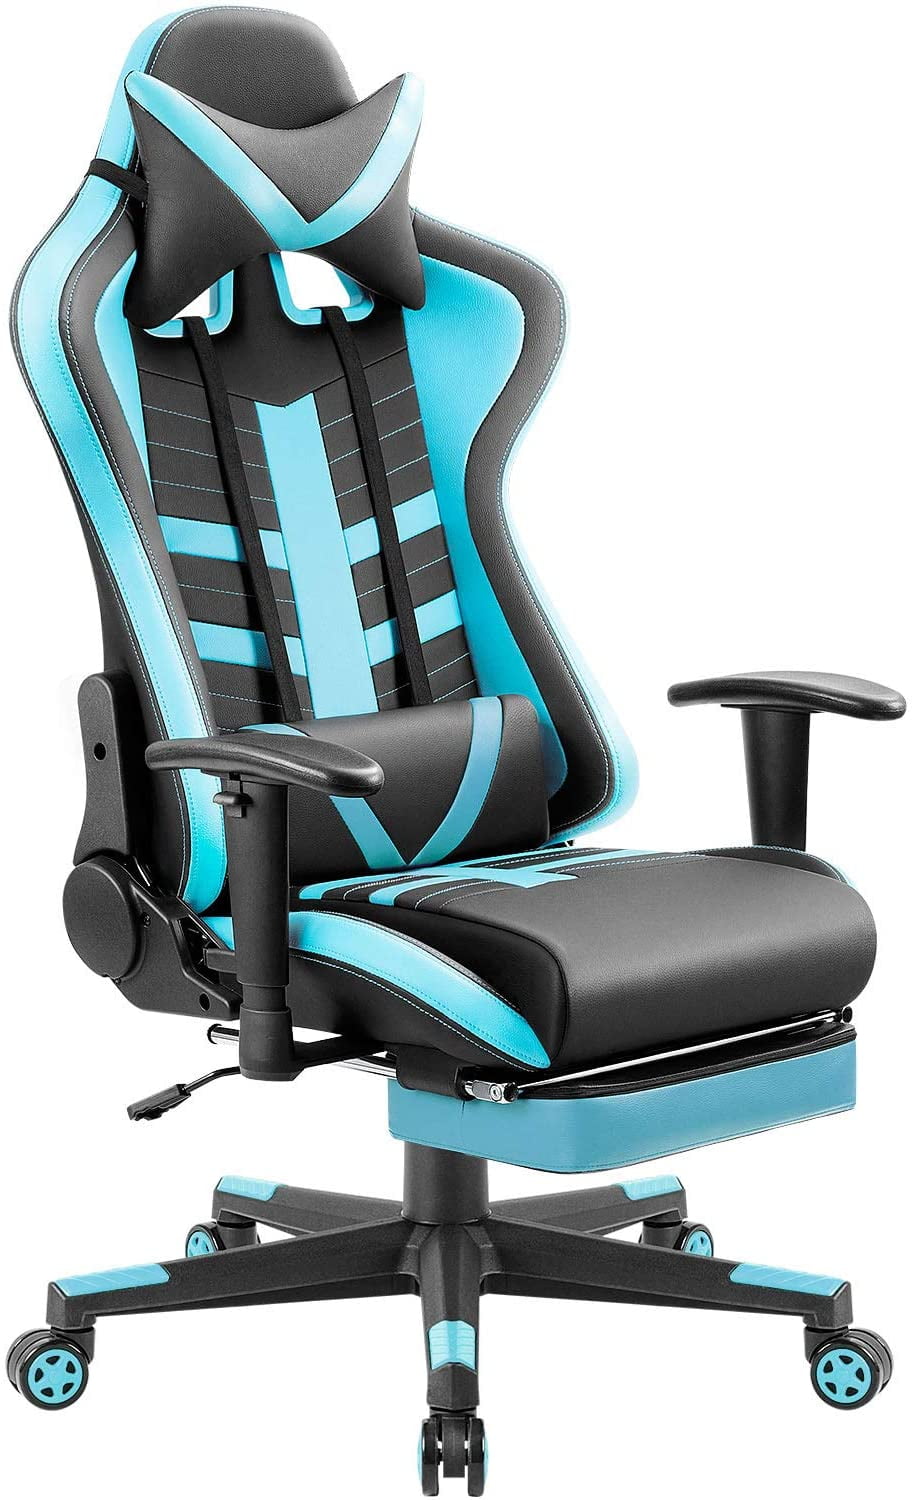 Creatice Gaming Chairs Cheap Walmart with Simple Decor